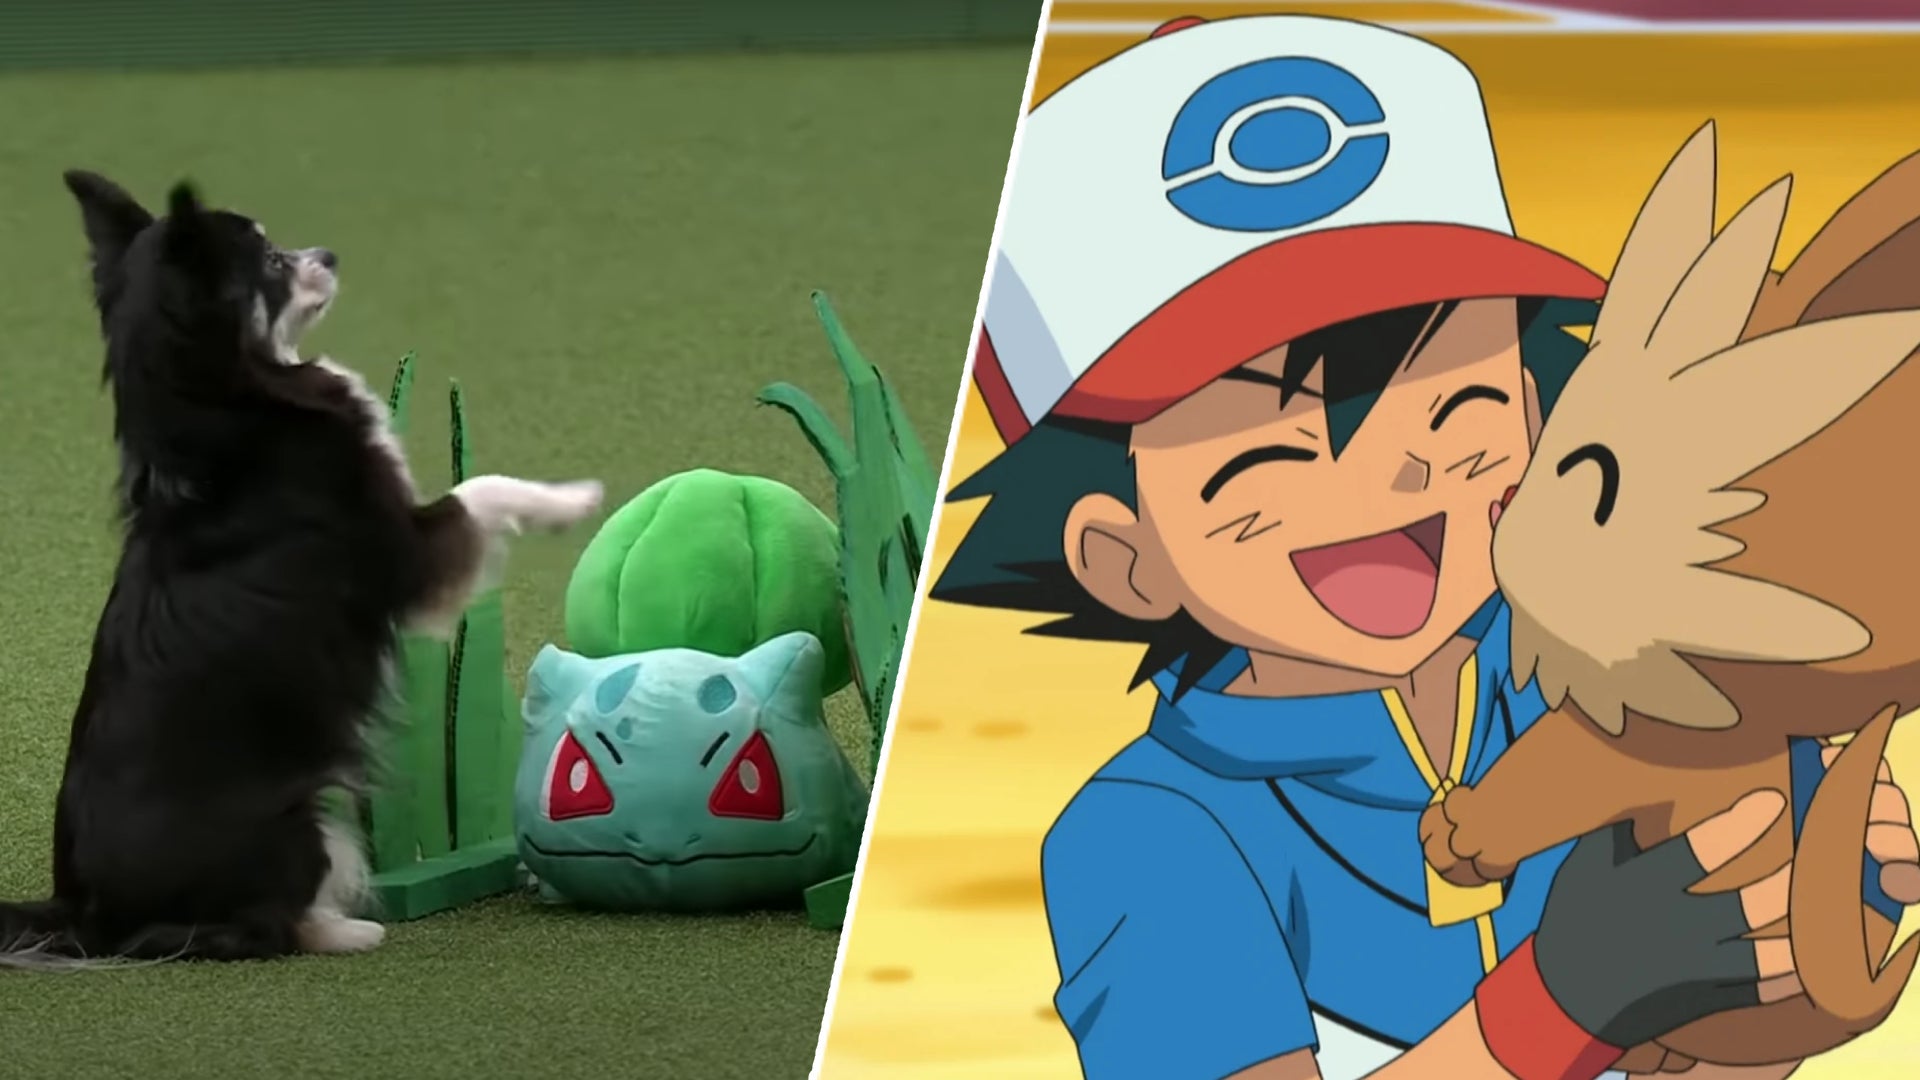 Image for Want to see a Pokemon routine at the Crufts dog show? Of course you do